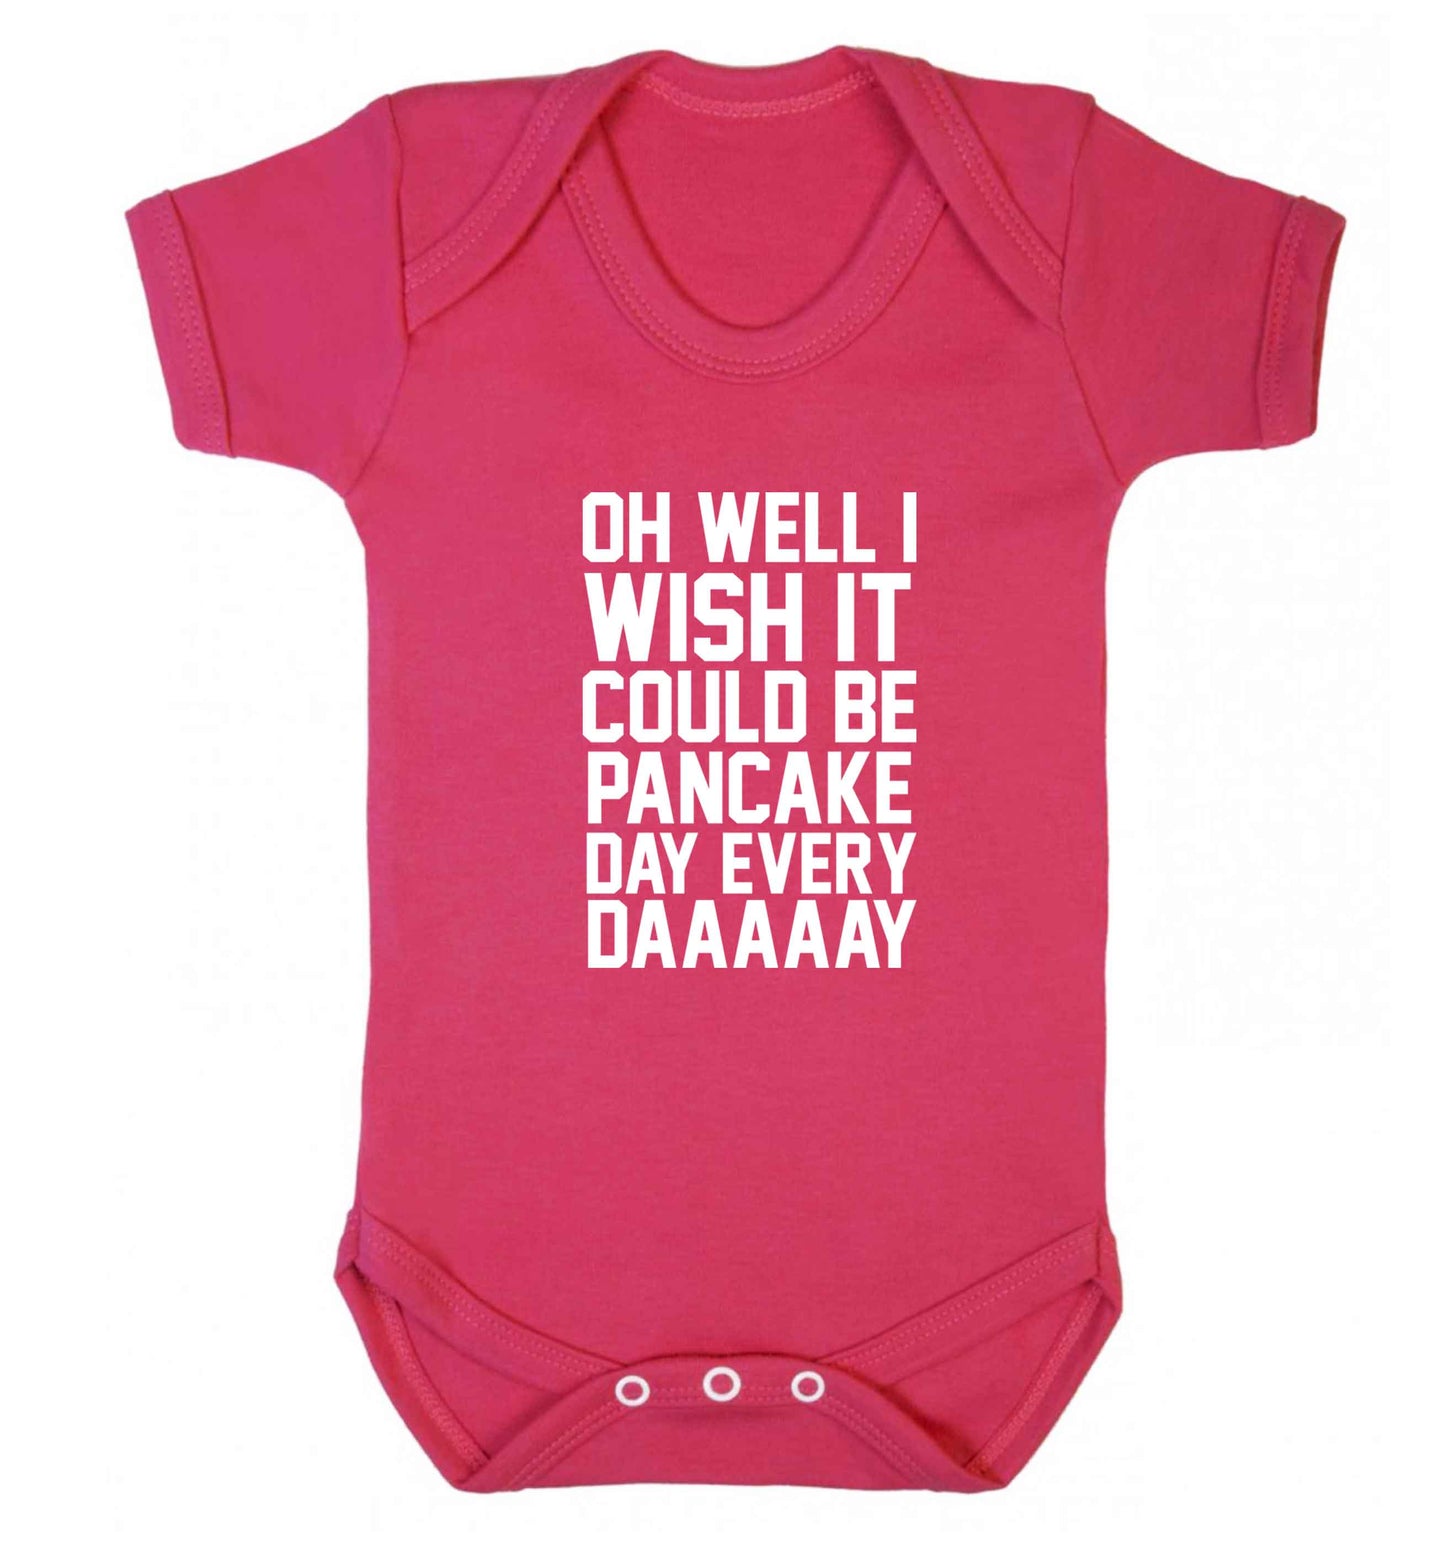 Oh well I wish it could be pancake day every day baby vest dark pink 18-24 months